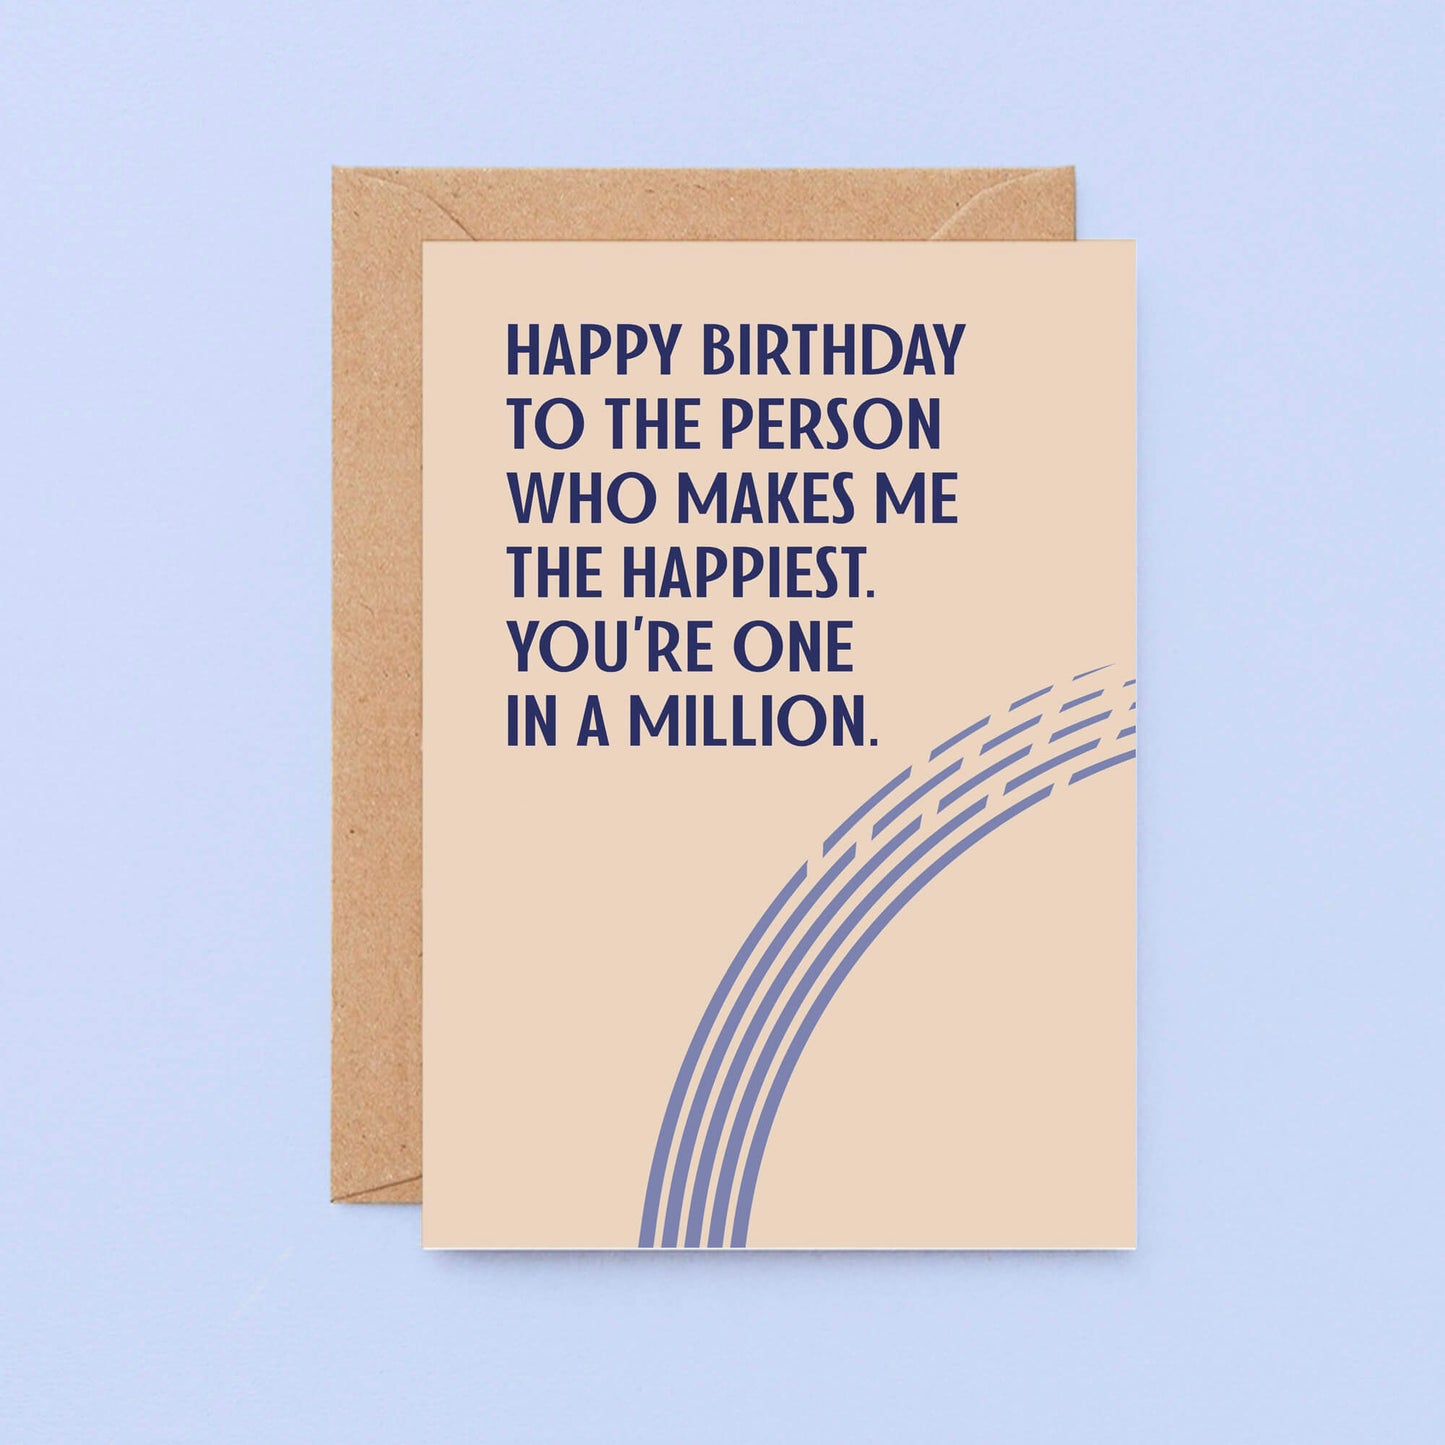 Birthday Card by SixElevenCreations. Reads Happy birthday to the person who makes me the happiest. You're one in a million. Product Code SE1102A6